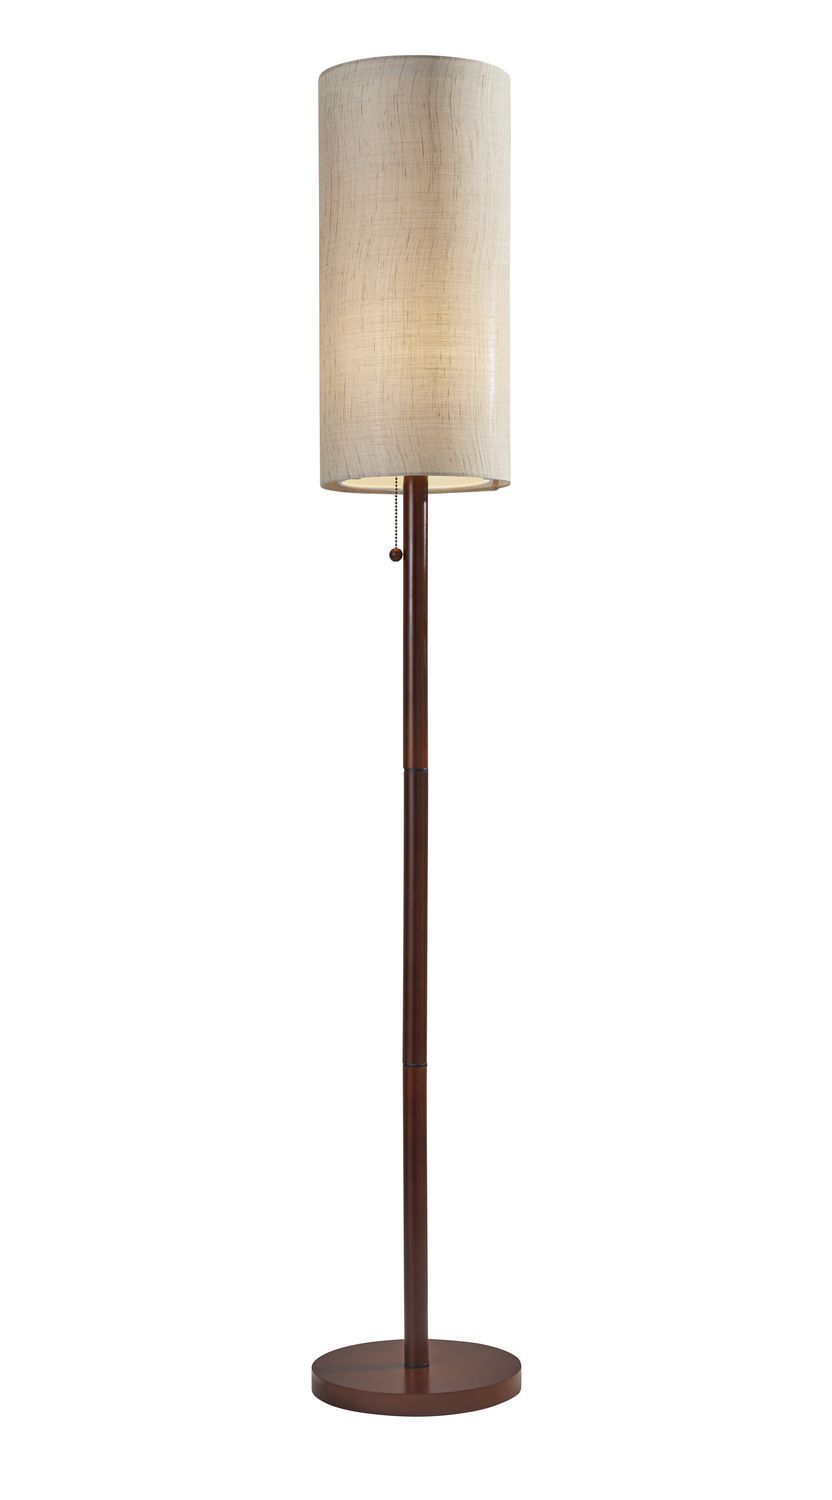 Transitional Floor Lamp In Walnut Wood From The Hamptons Collection Adesso Home 3338 15 | Narrow Floor Lamp, Floor Lamp, Wood Floor Lamp For Walnut Floor Lamps (Photo 11 of 15)